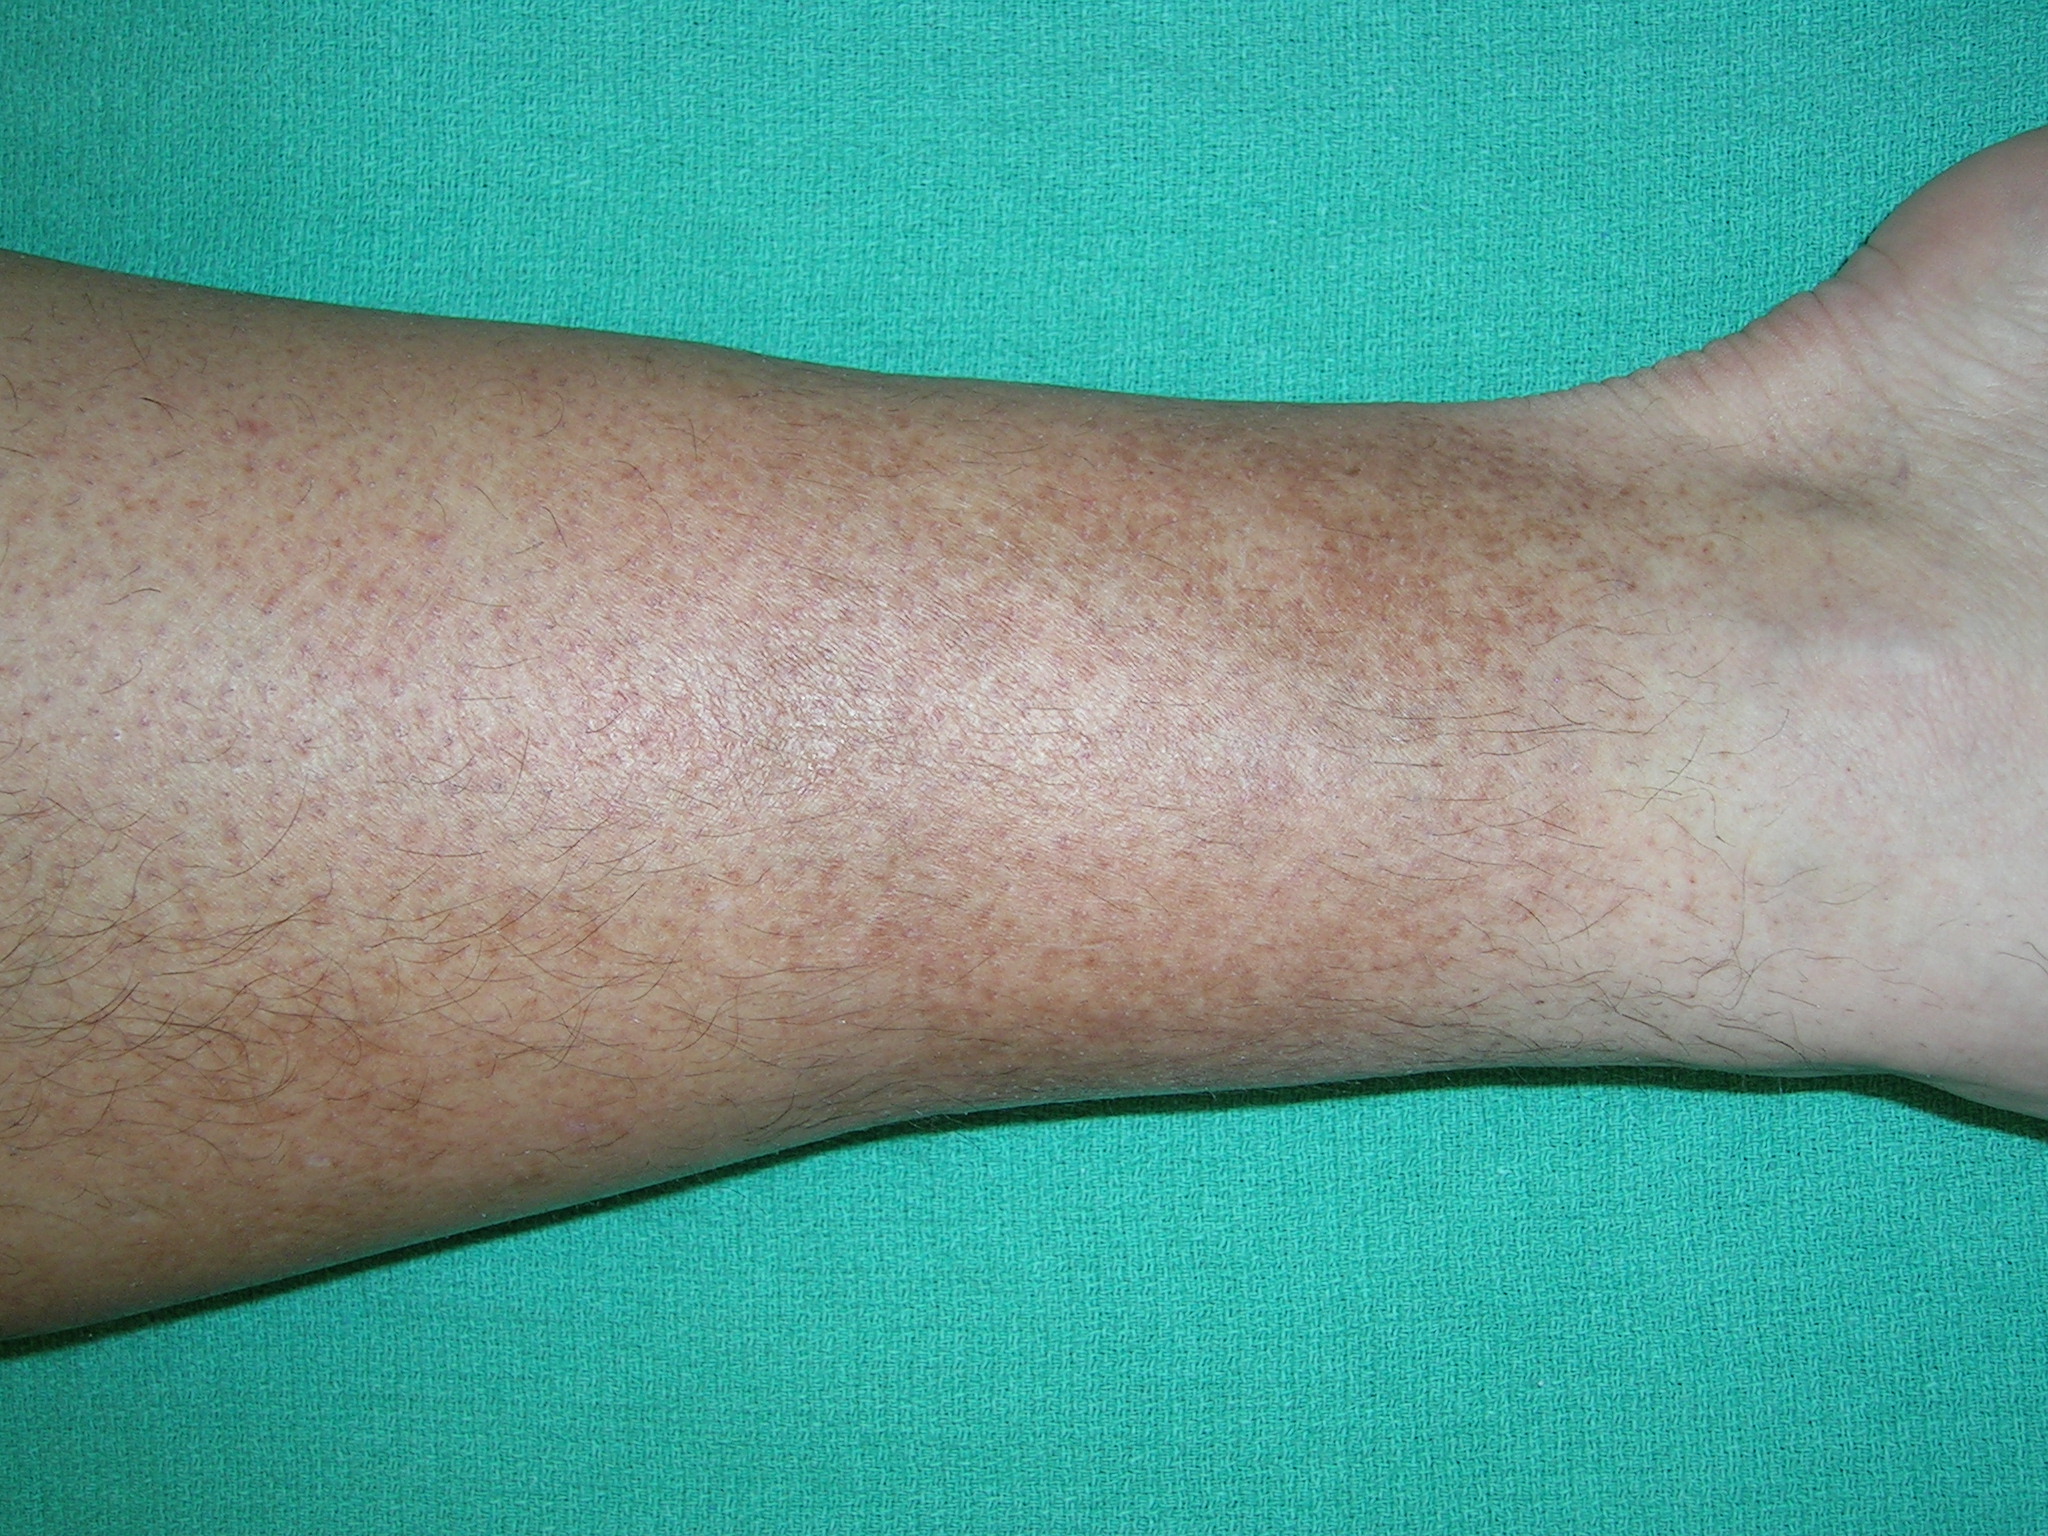 Leg Discoloration Treatment and Causes